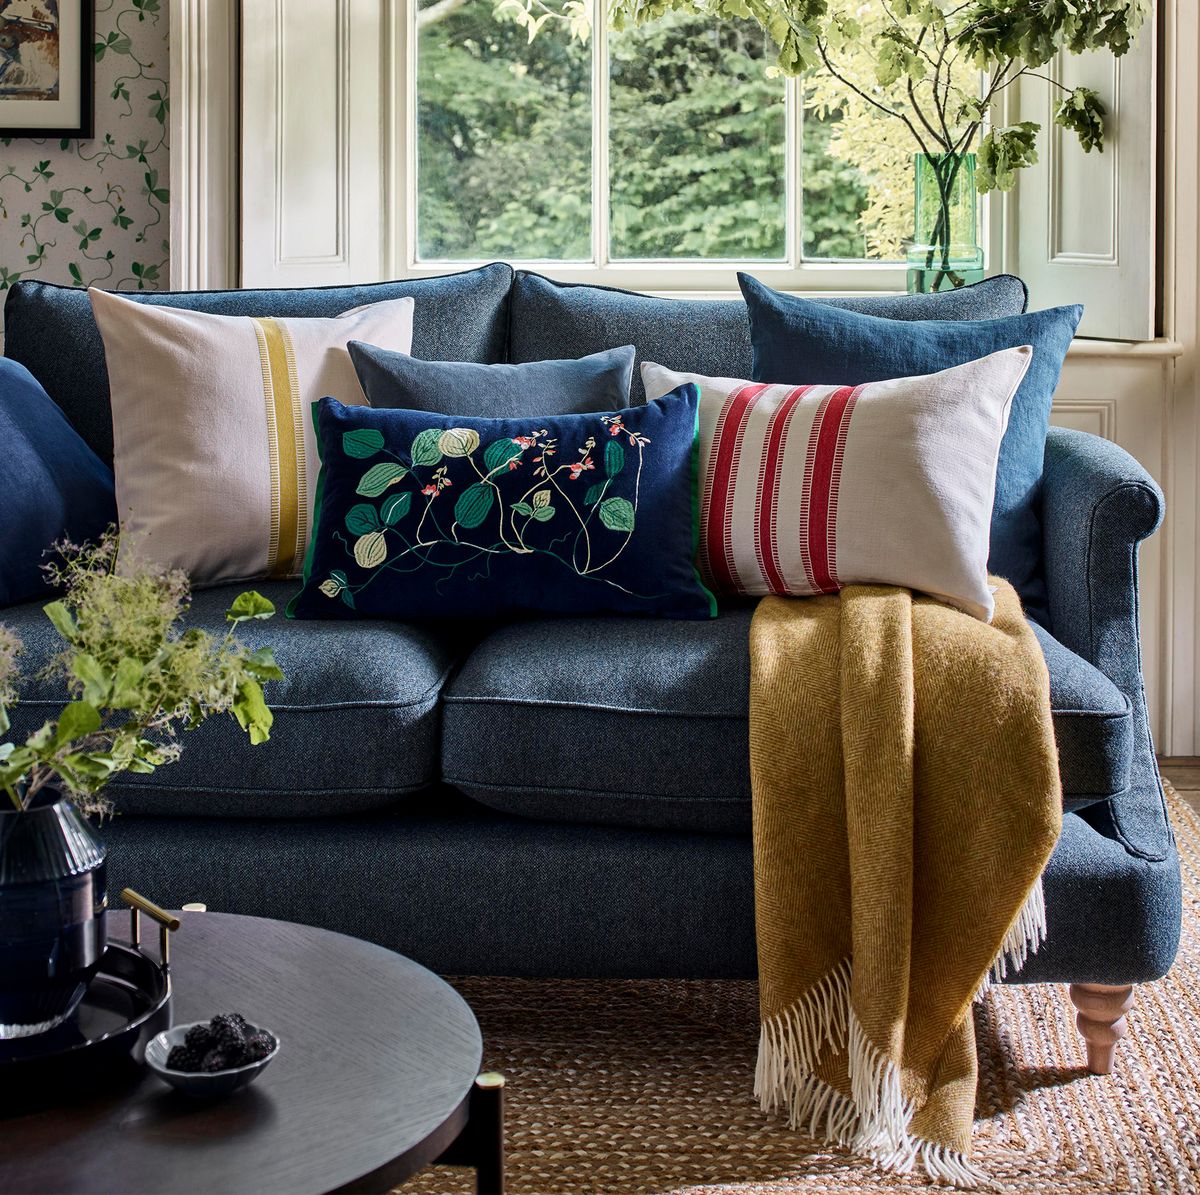 Royal blue throw pillows and dark grey couch